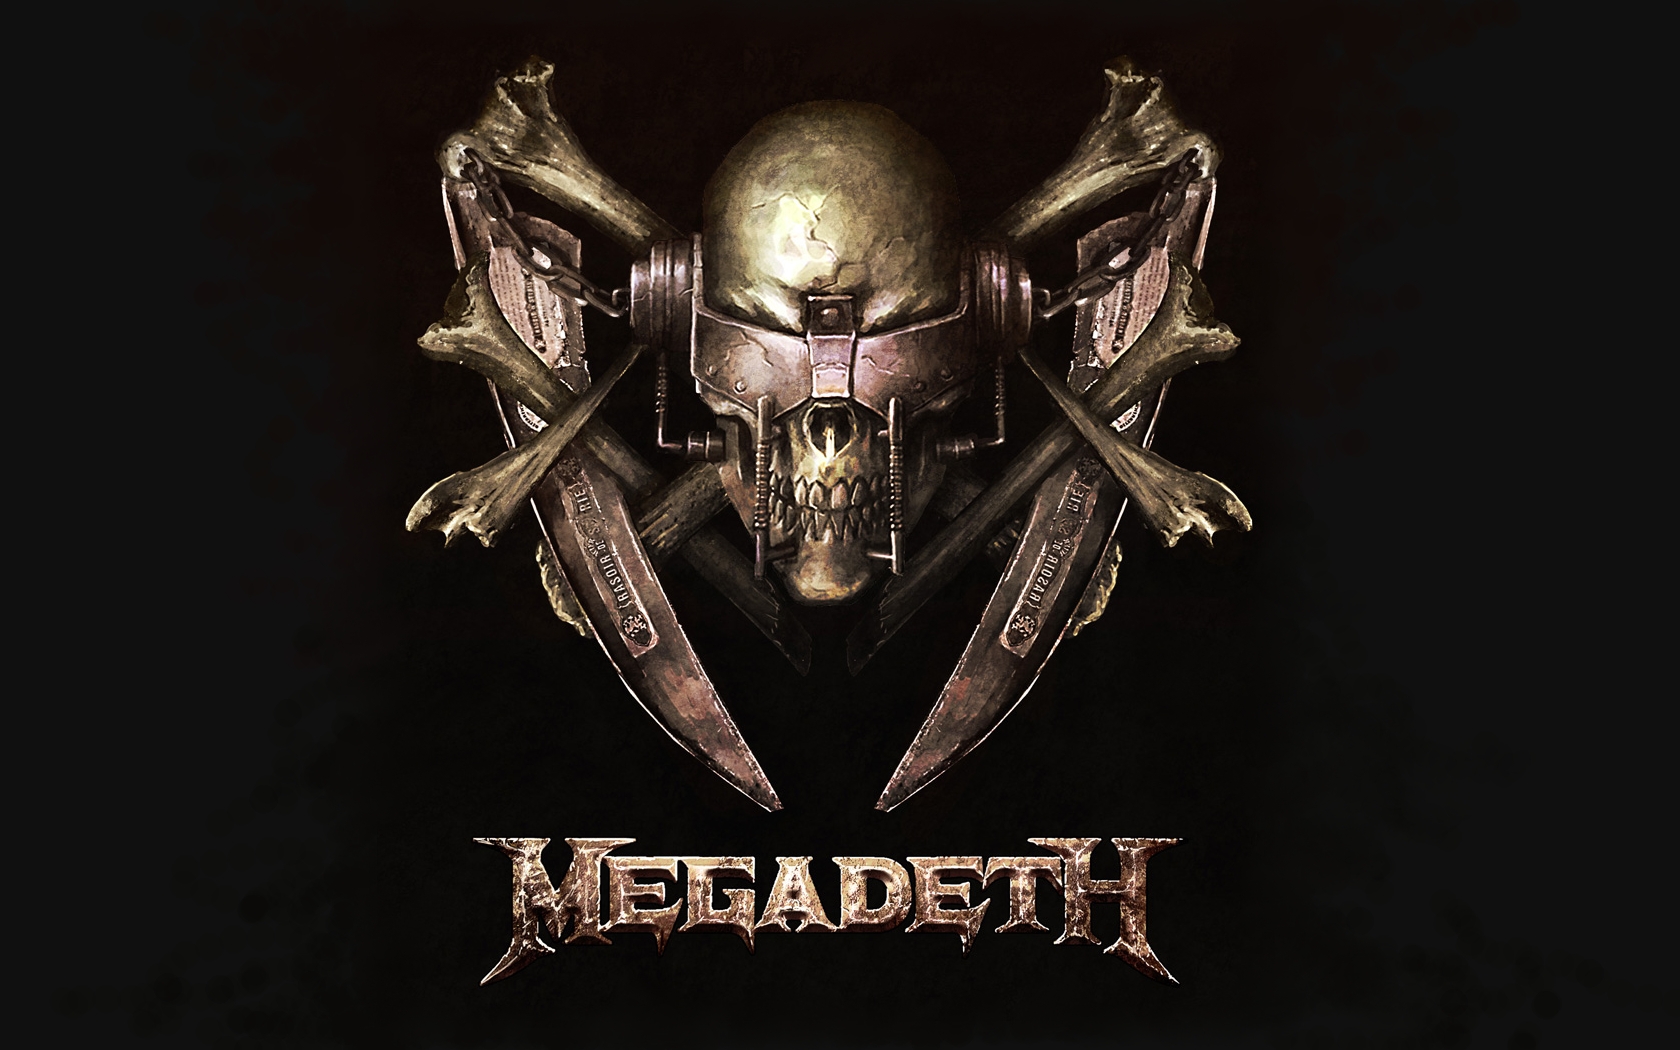 Megadeth Dystopia Wallpapers